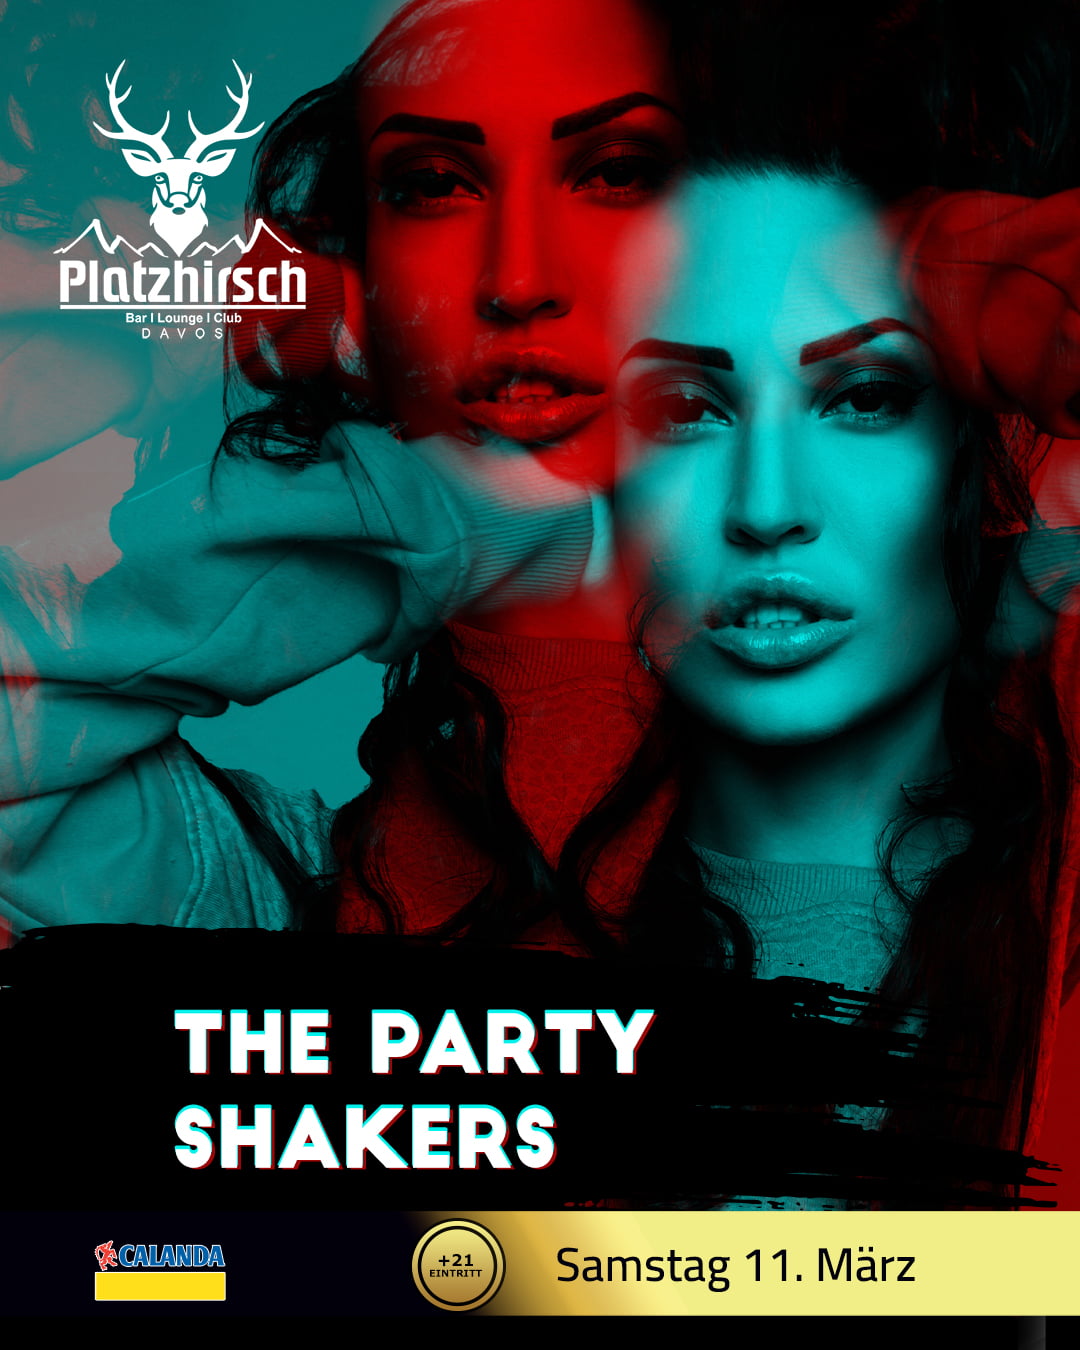 Samstag 11. März The party Shakers